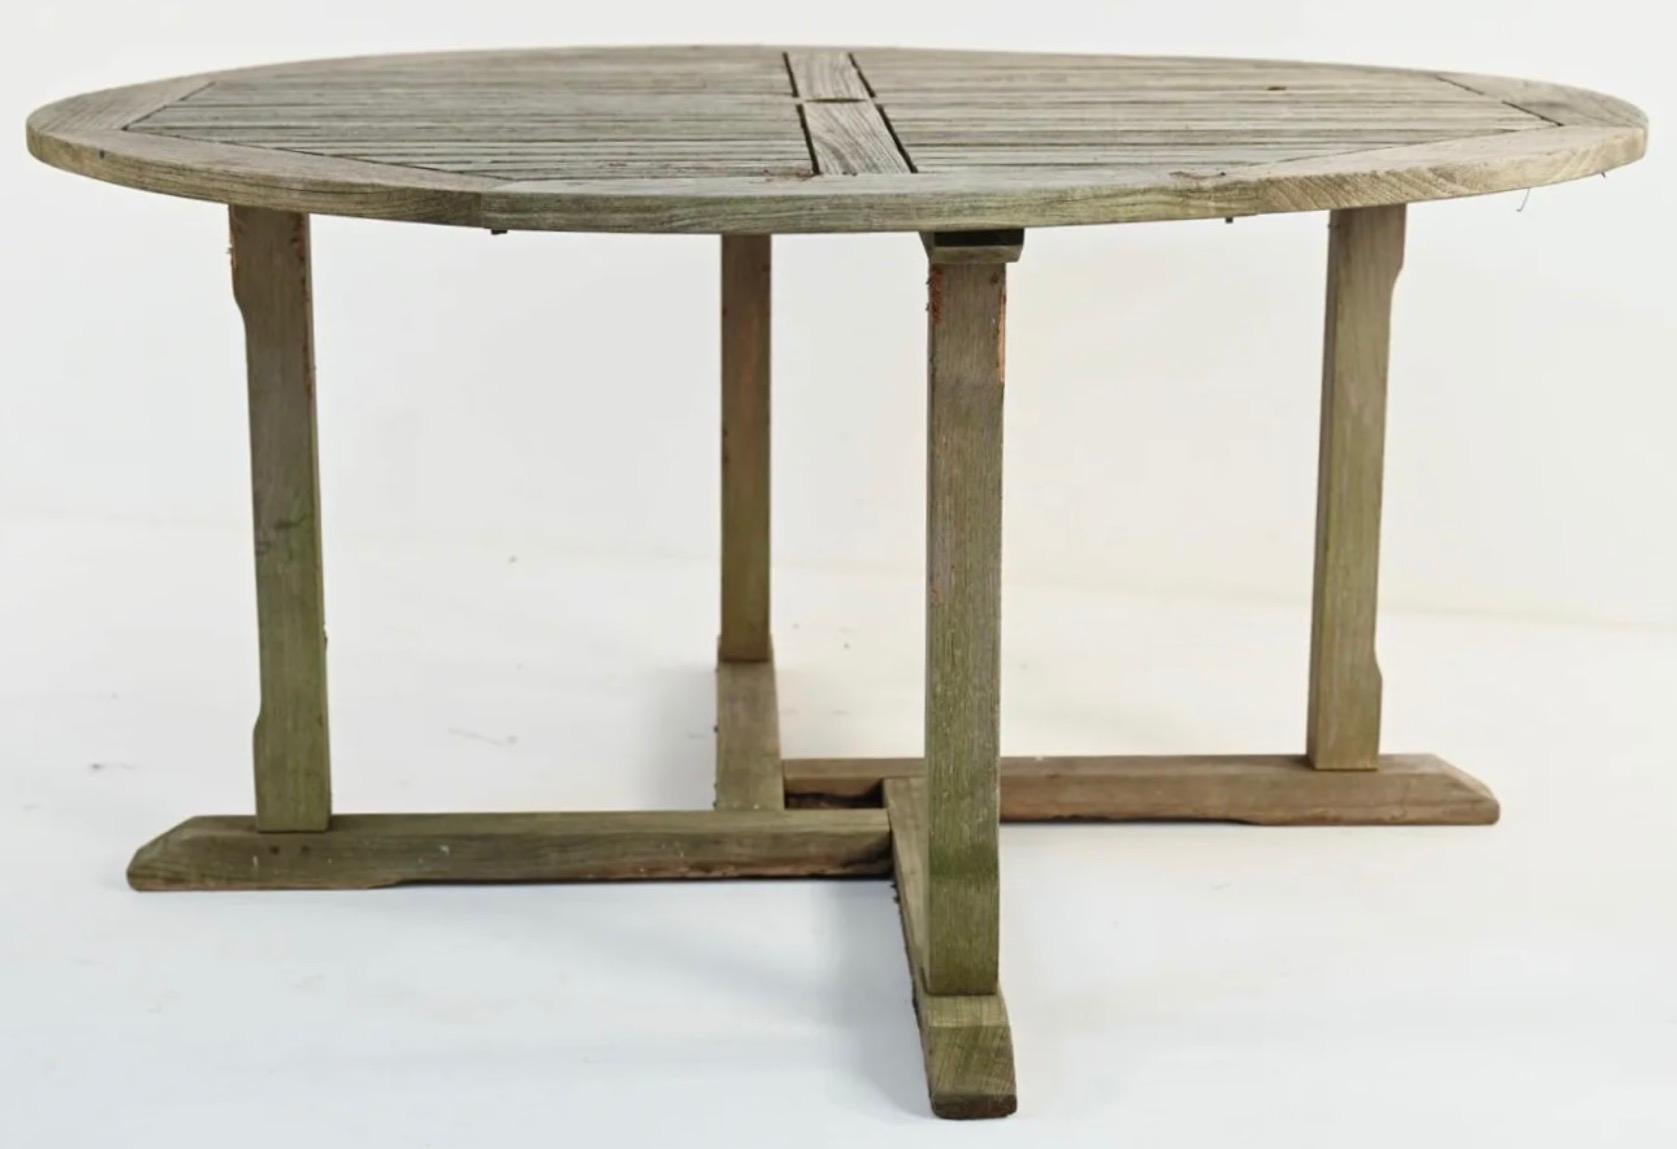 Vintage outdoor round teak wood garden, porch or patio dining table with center hole for umbrella.
 